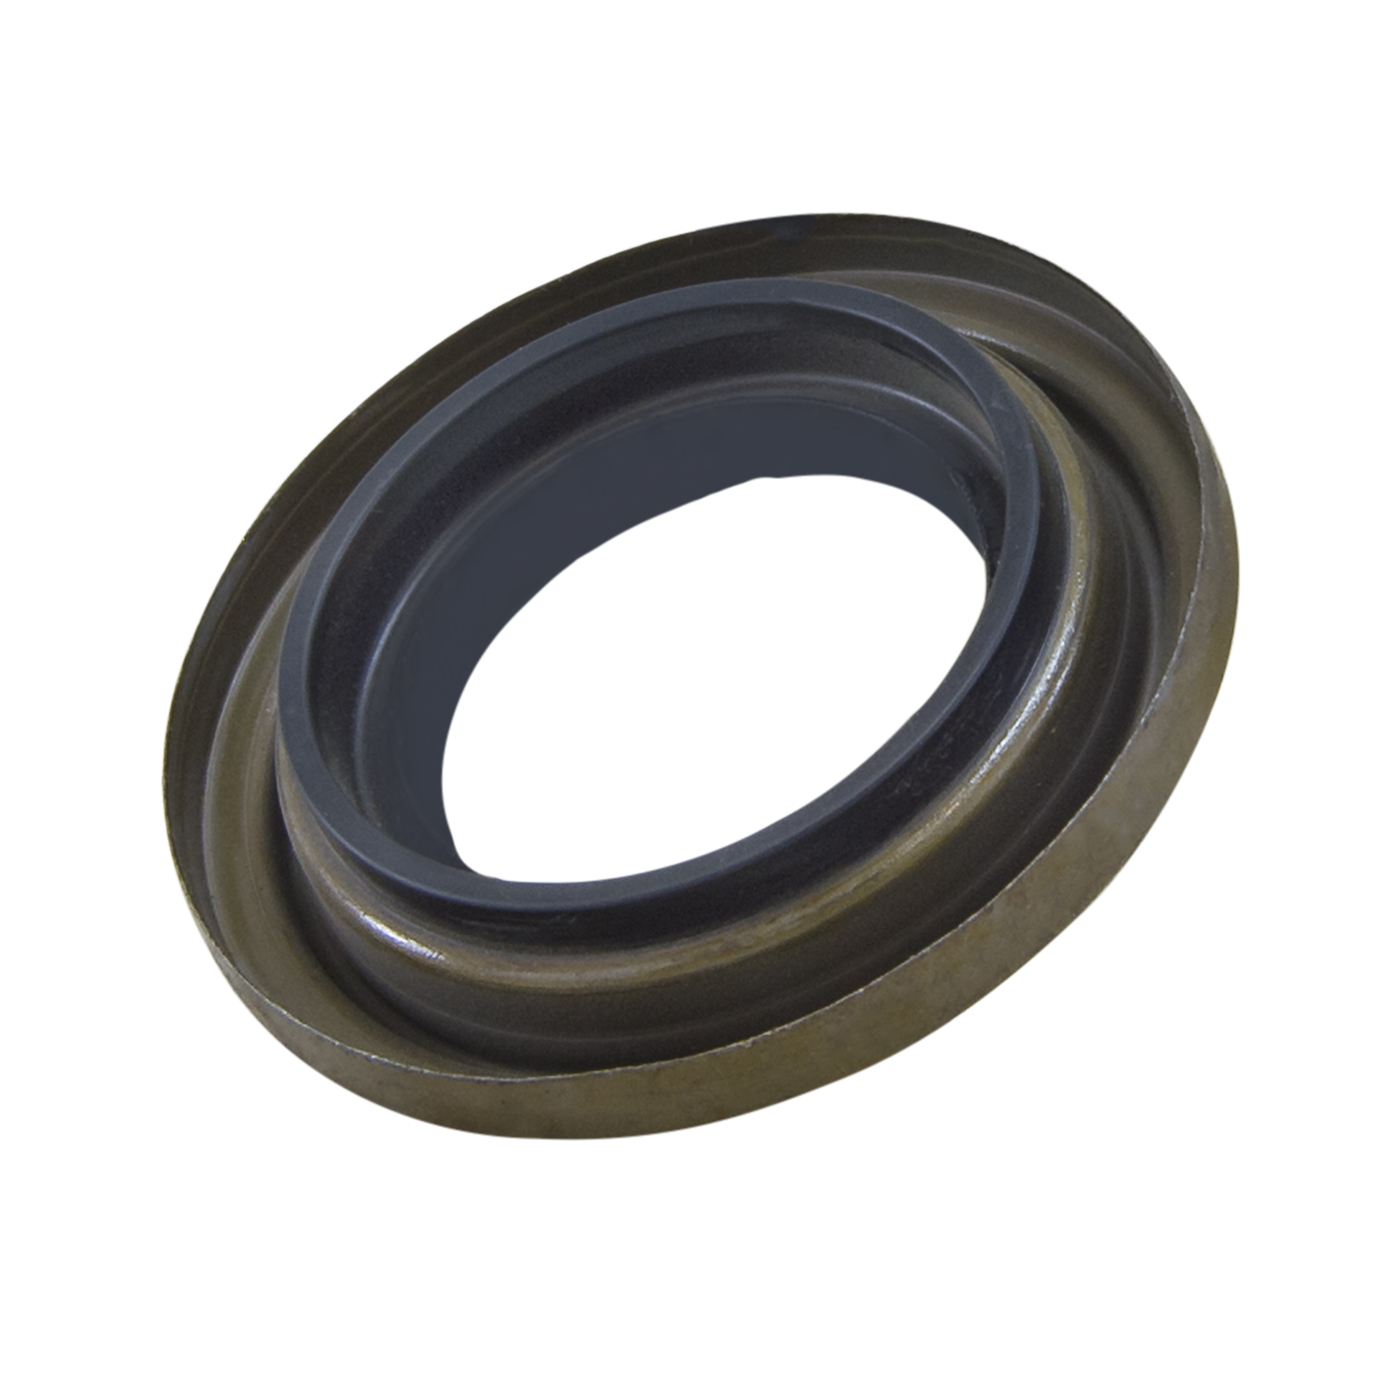 Replacement Pinion Seal For Model 35 Differential With